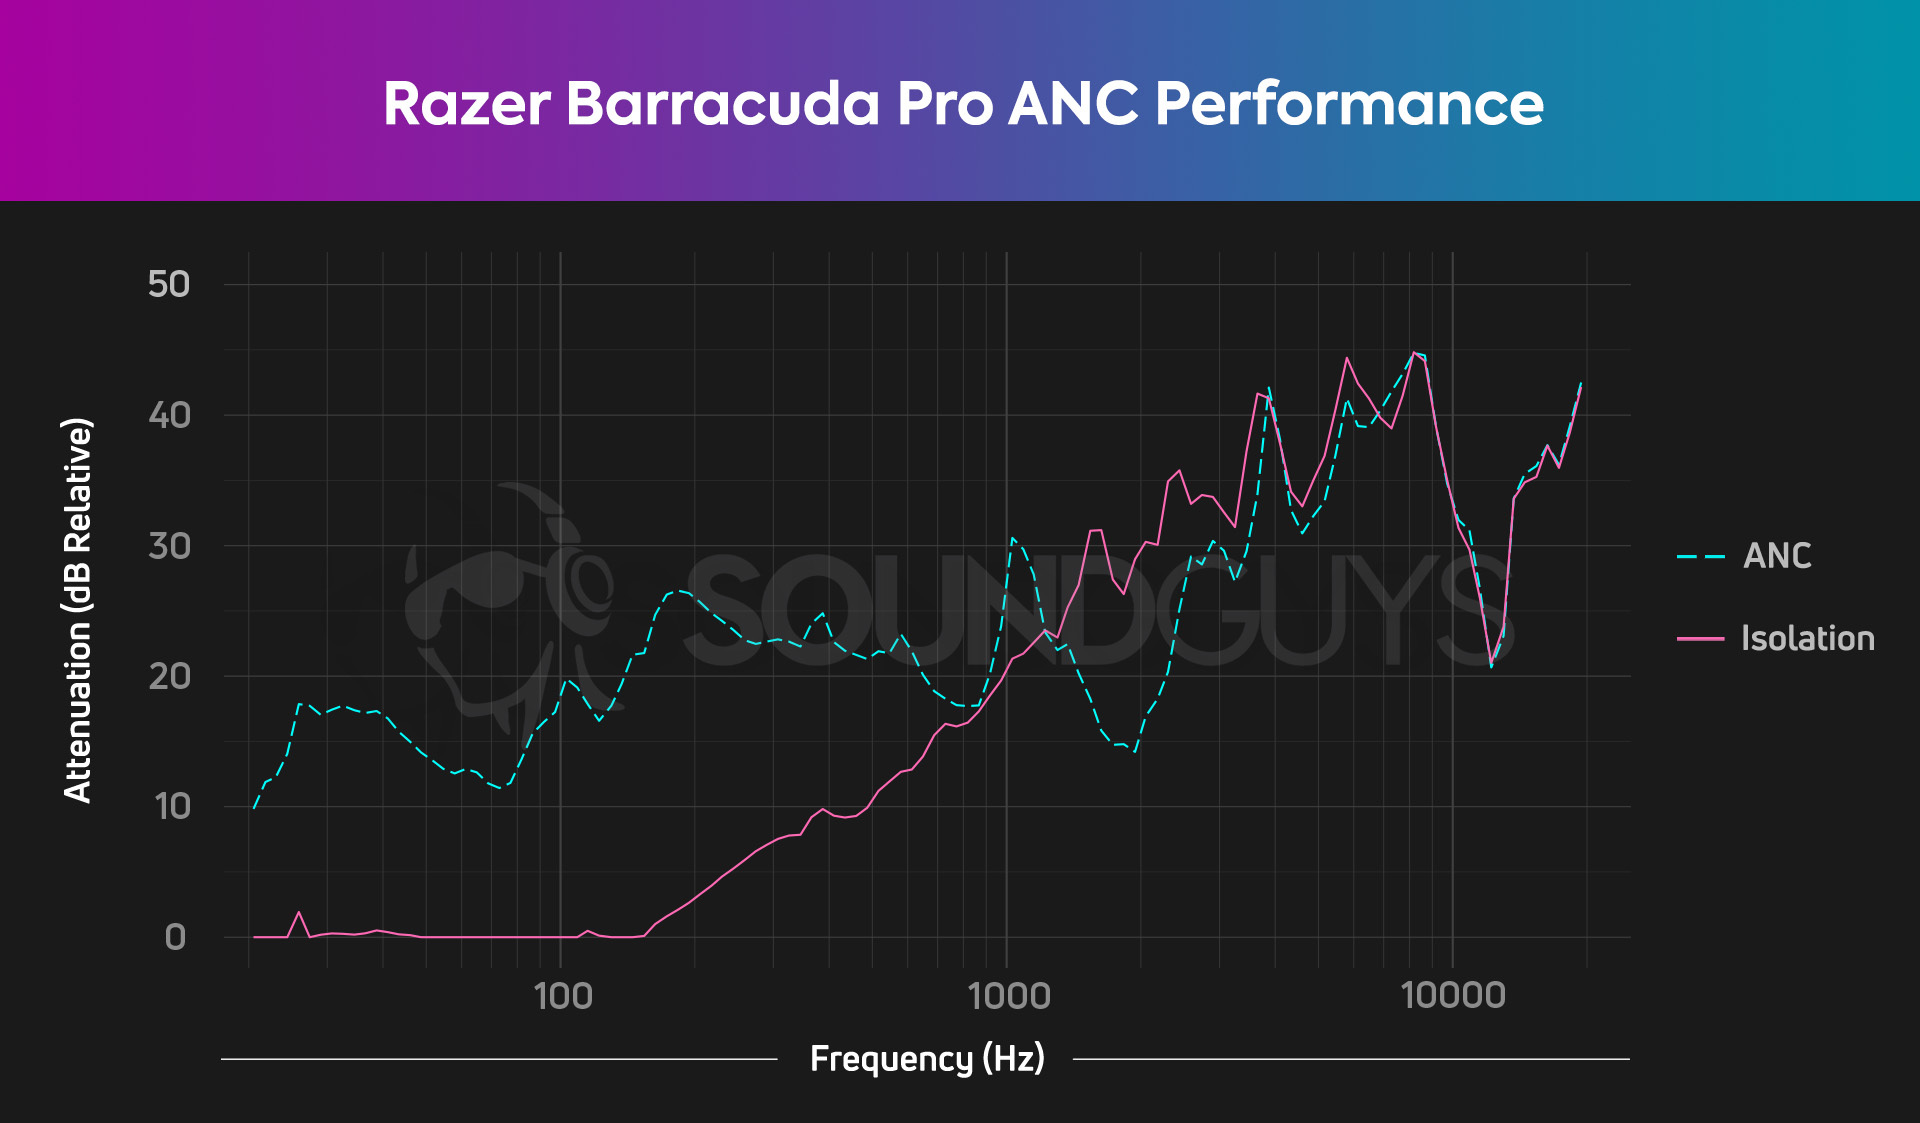 The active noise canceling chart for the Razer Barracuda Pro, showing fairly good ANC performance.